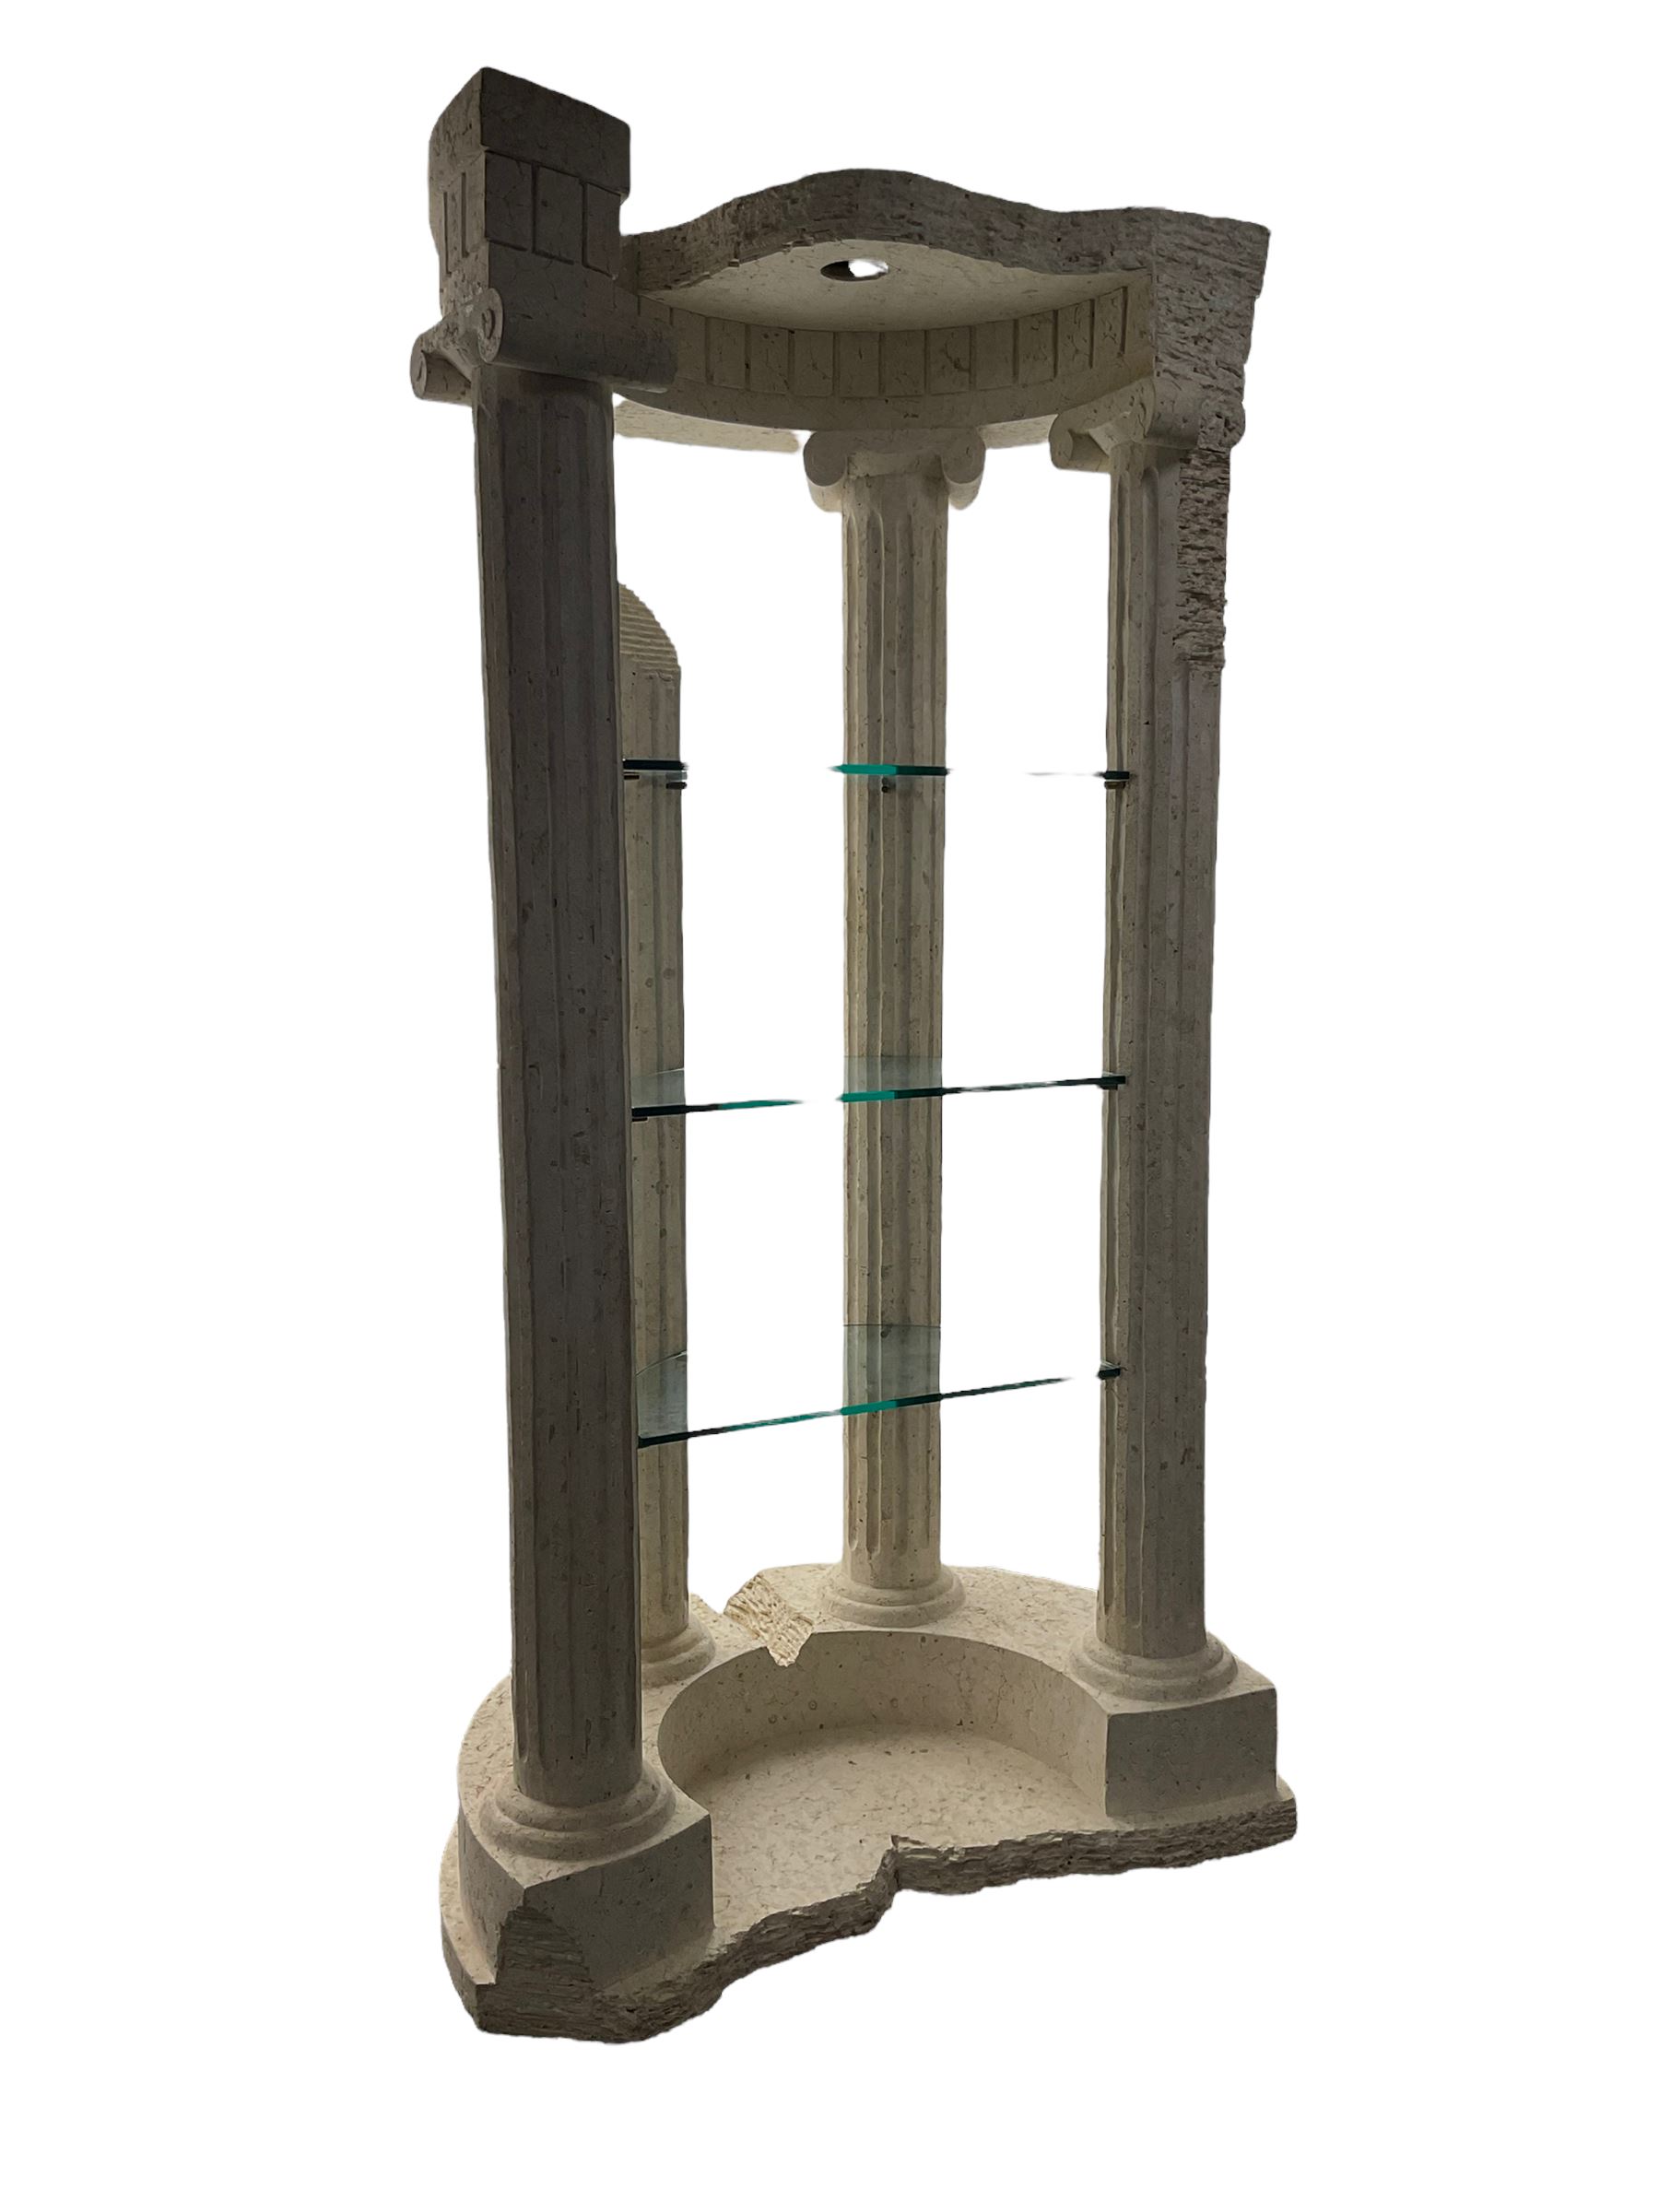 Cast architectural stone effect column display stand - Image 2 of 6